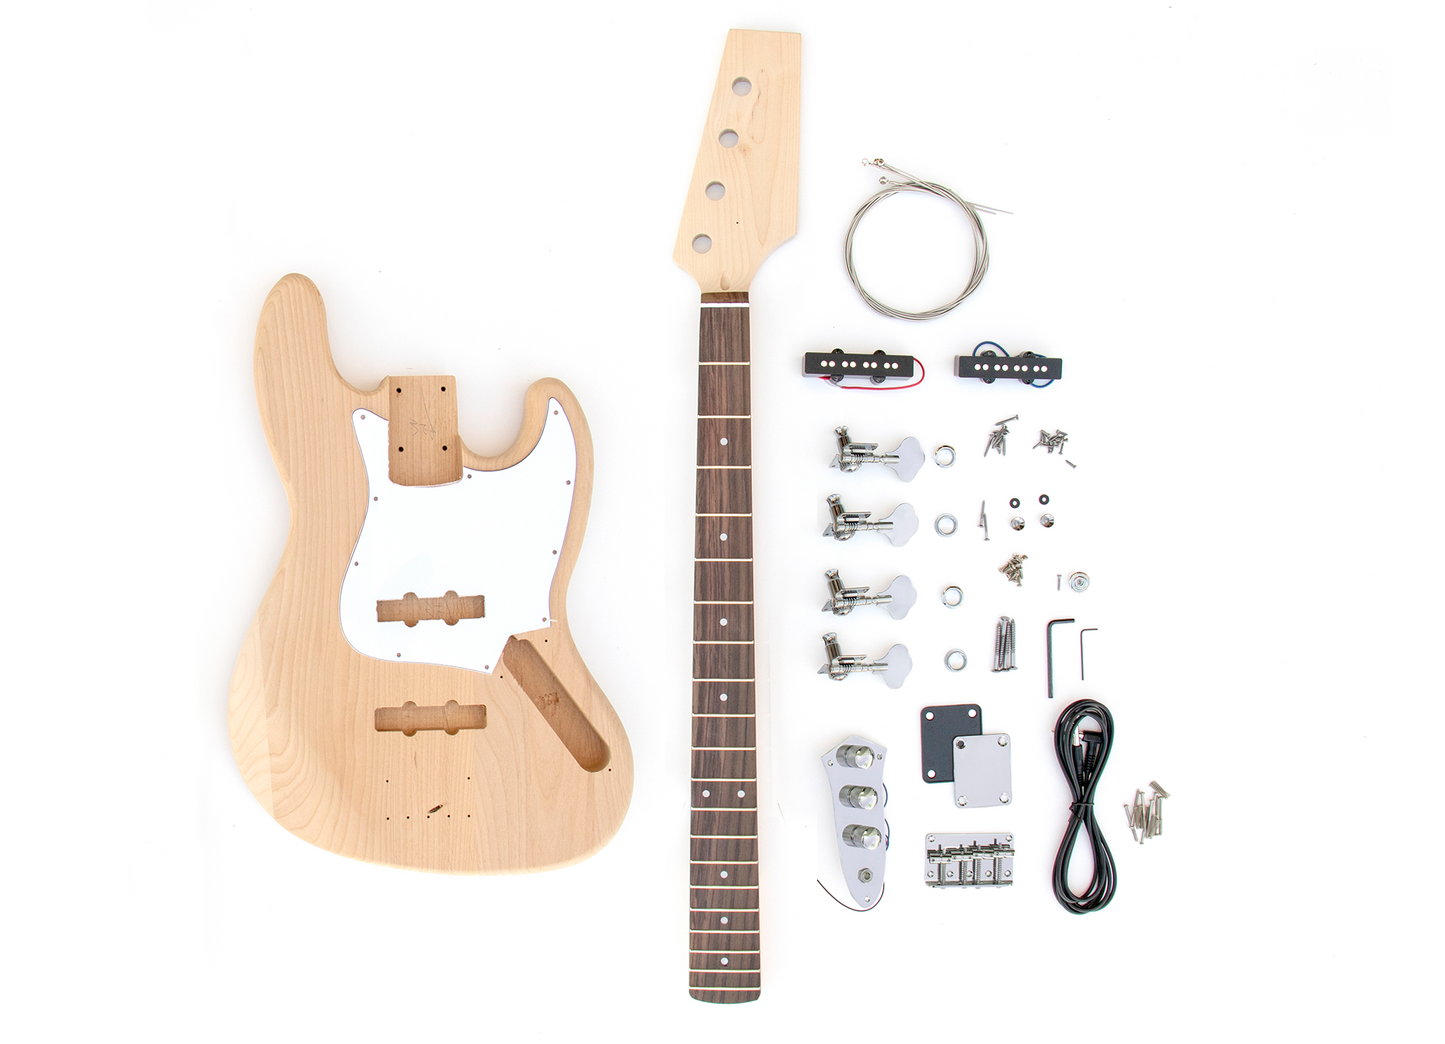 JB Style Build Your Own Bass Guitar Kit